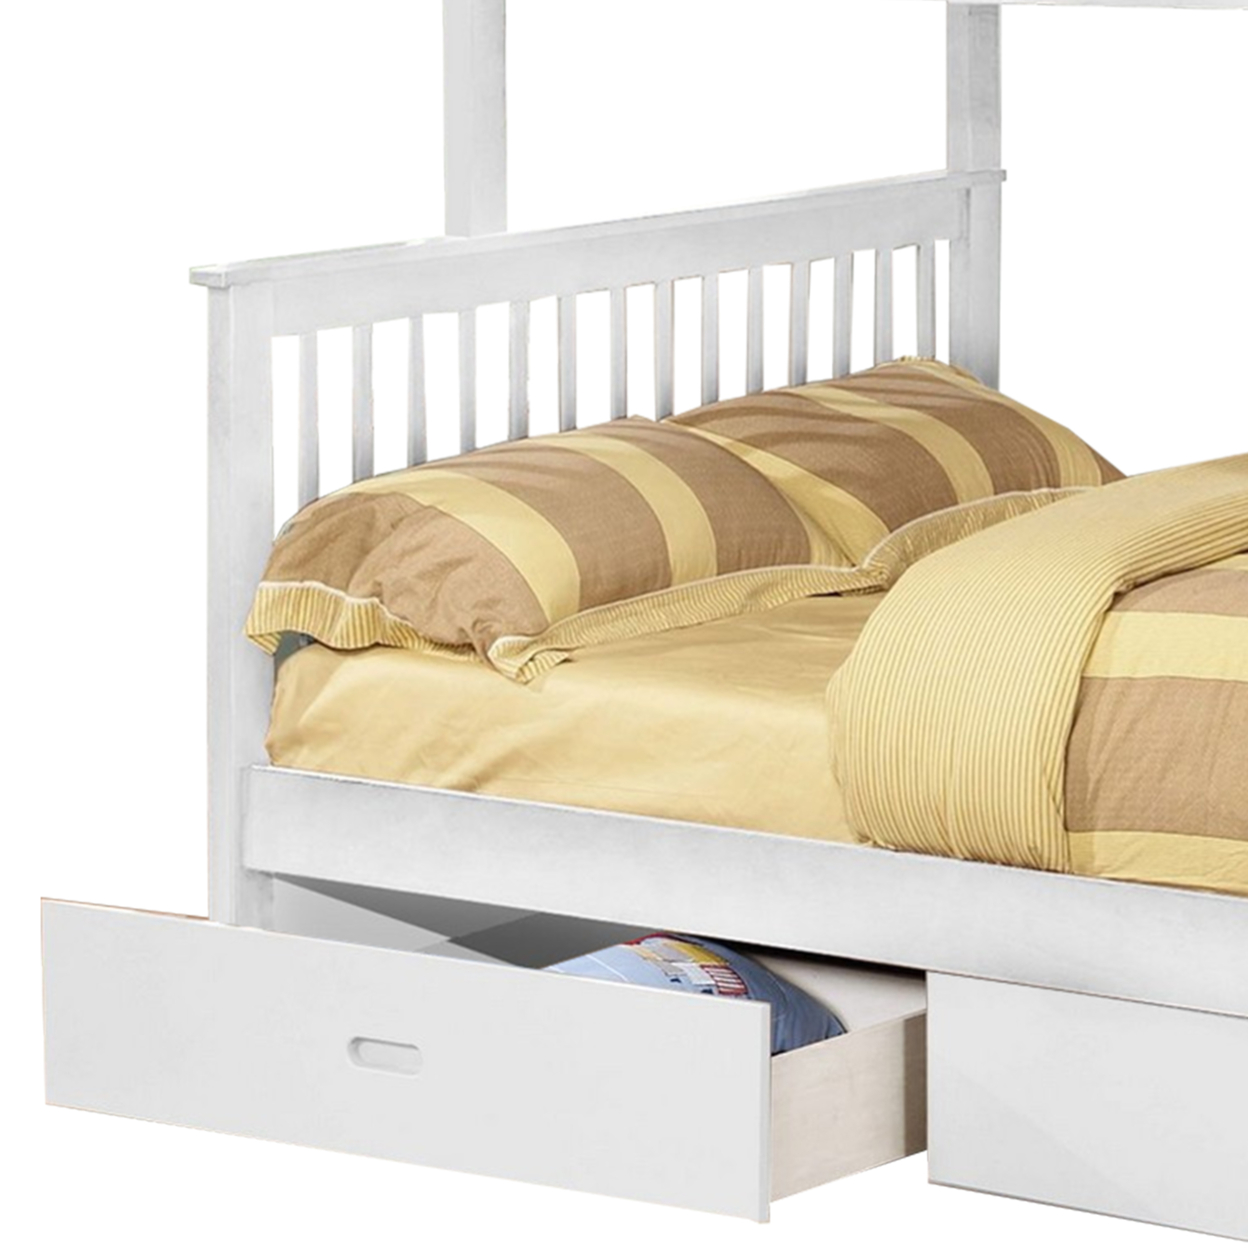 Mission Style Wooden Twin Over Full Bunk Bed With 2 Drawers, White- Saltoro Sherpi